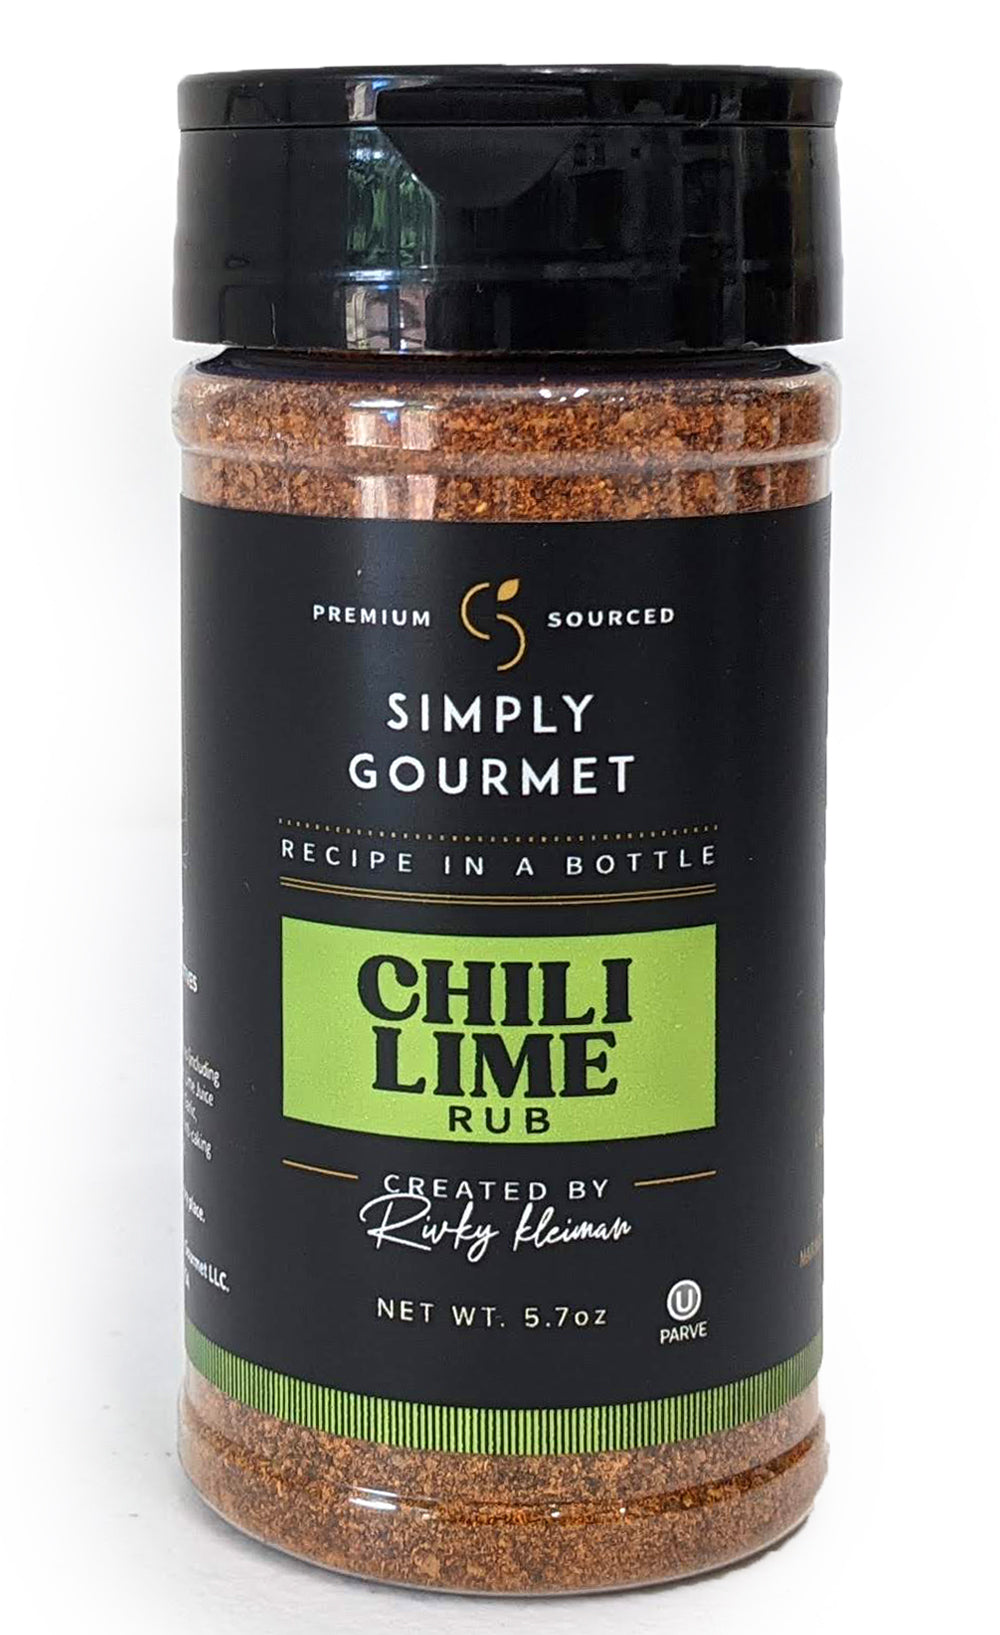 Simply Gourmet, Chili Lime Rub, created by Rivky Kleiman